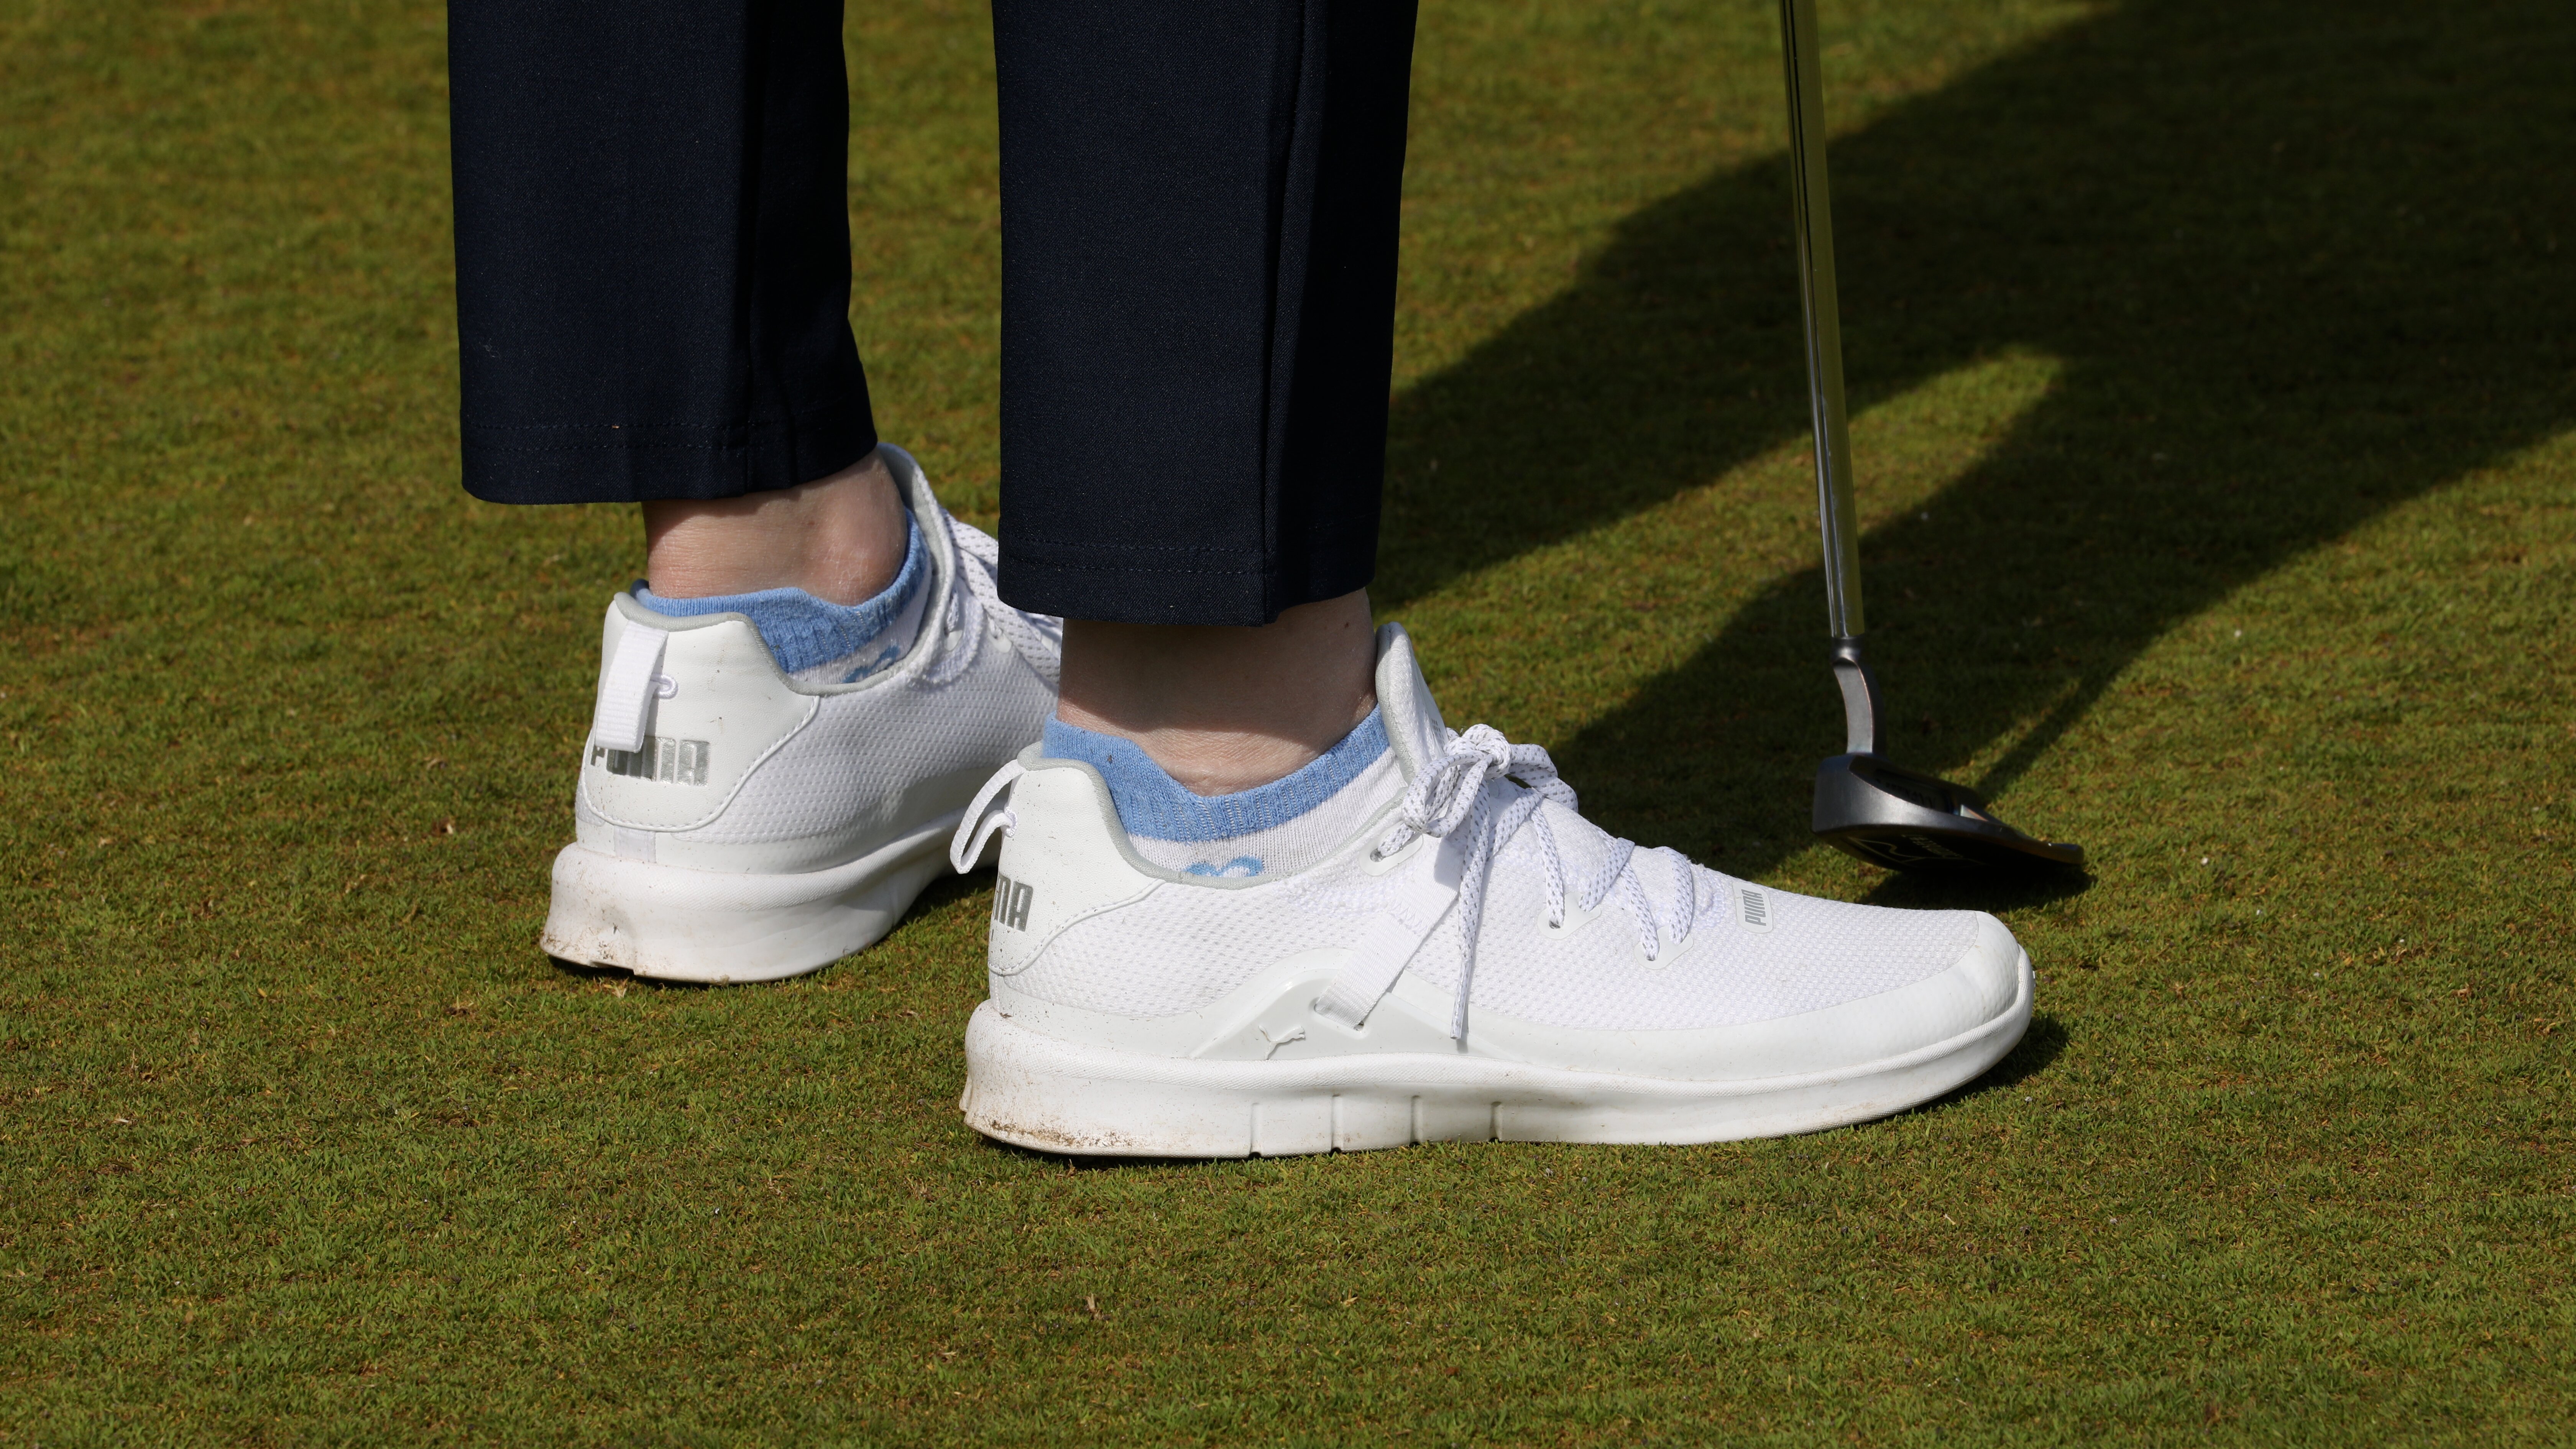 Why Golfers Won't Give Up Their Ecco Shoes - Sports Illustrated